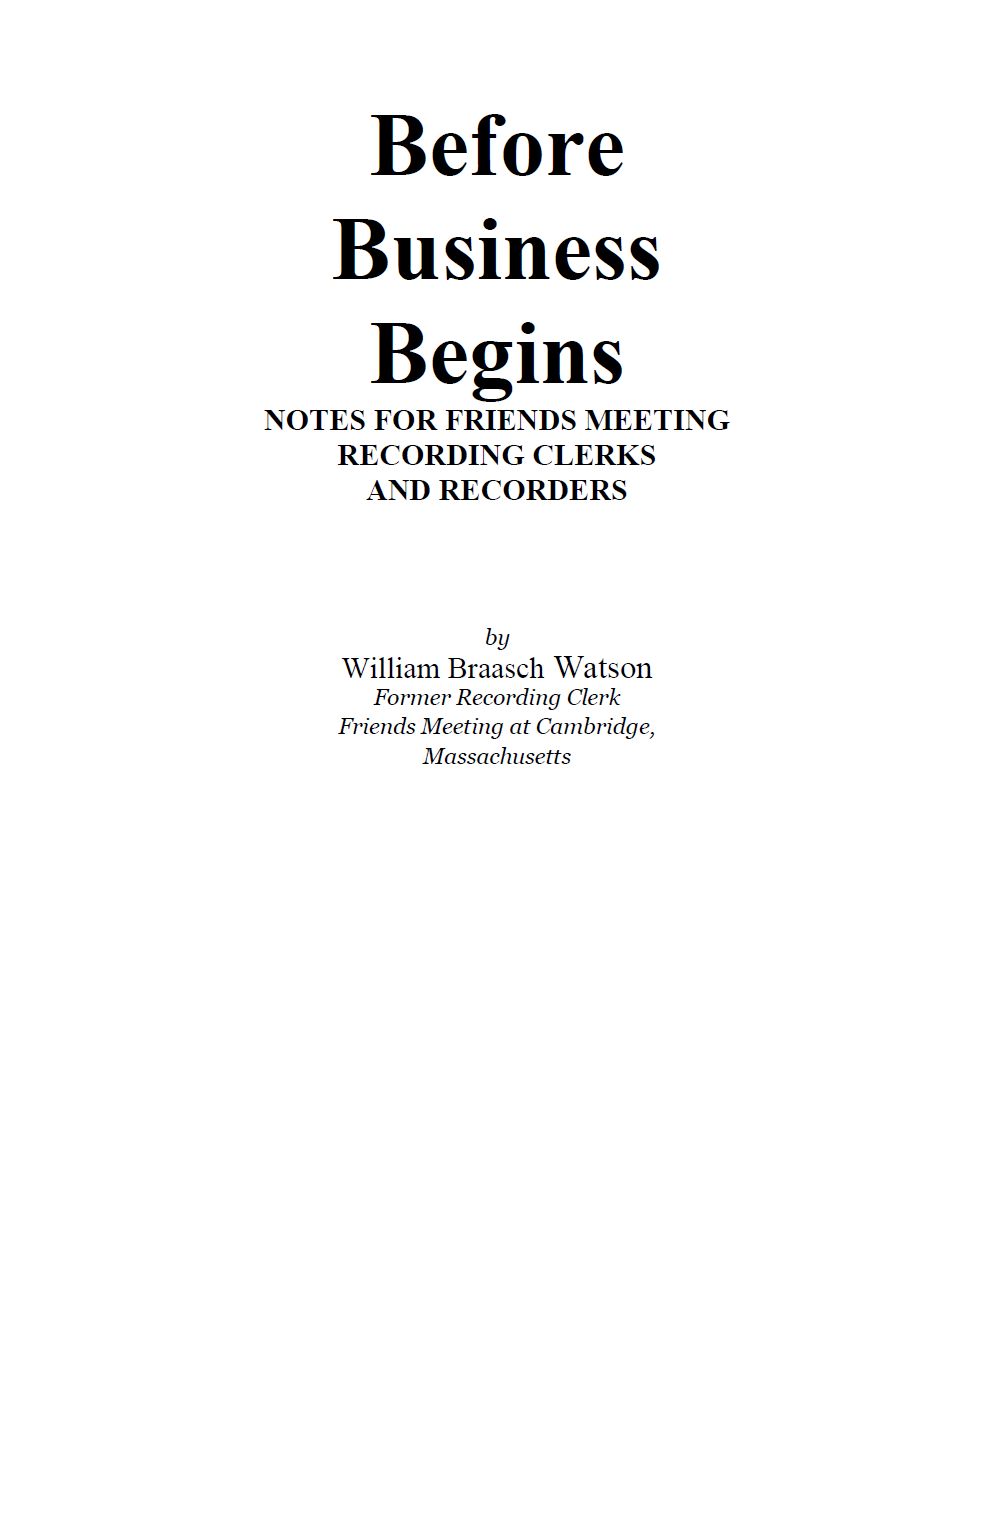 “Before Business Begins” - by William B Watson-